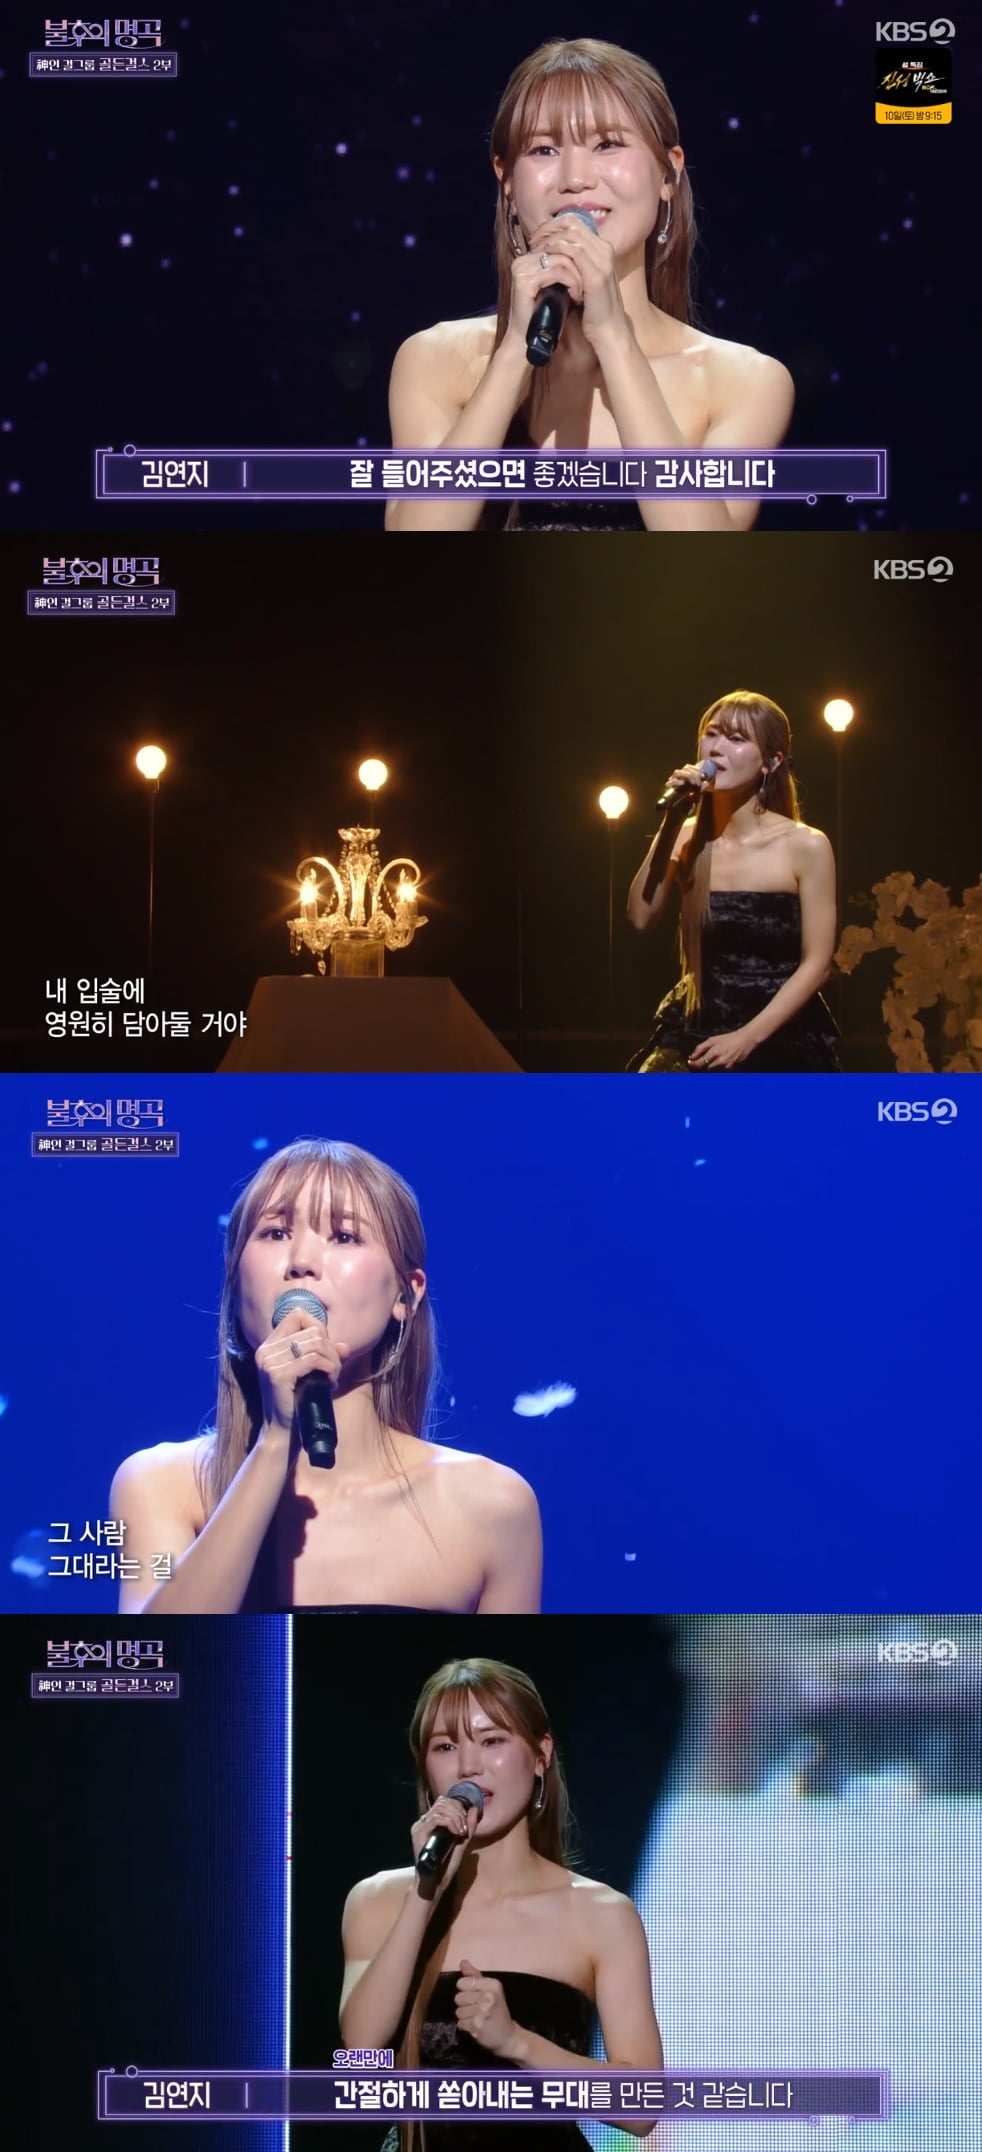 Kim Yeon-ji shed a storm of tears... “I was comforted by Lee Eun-mi’s expression”